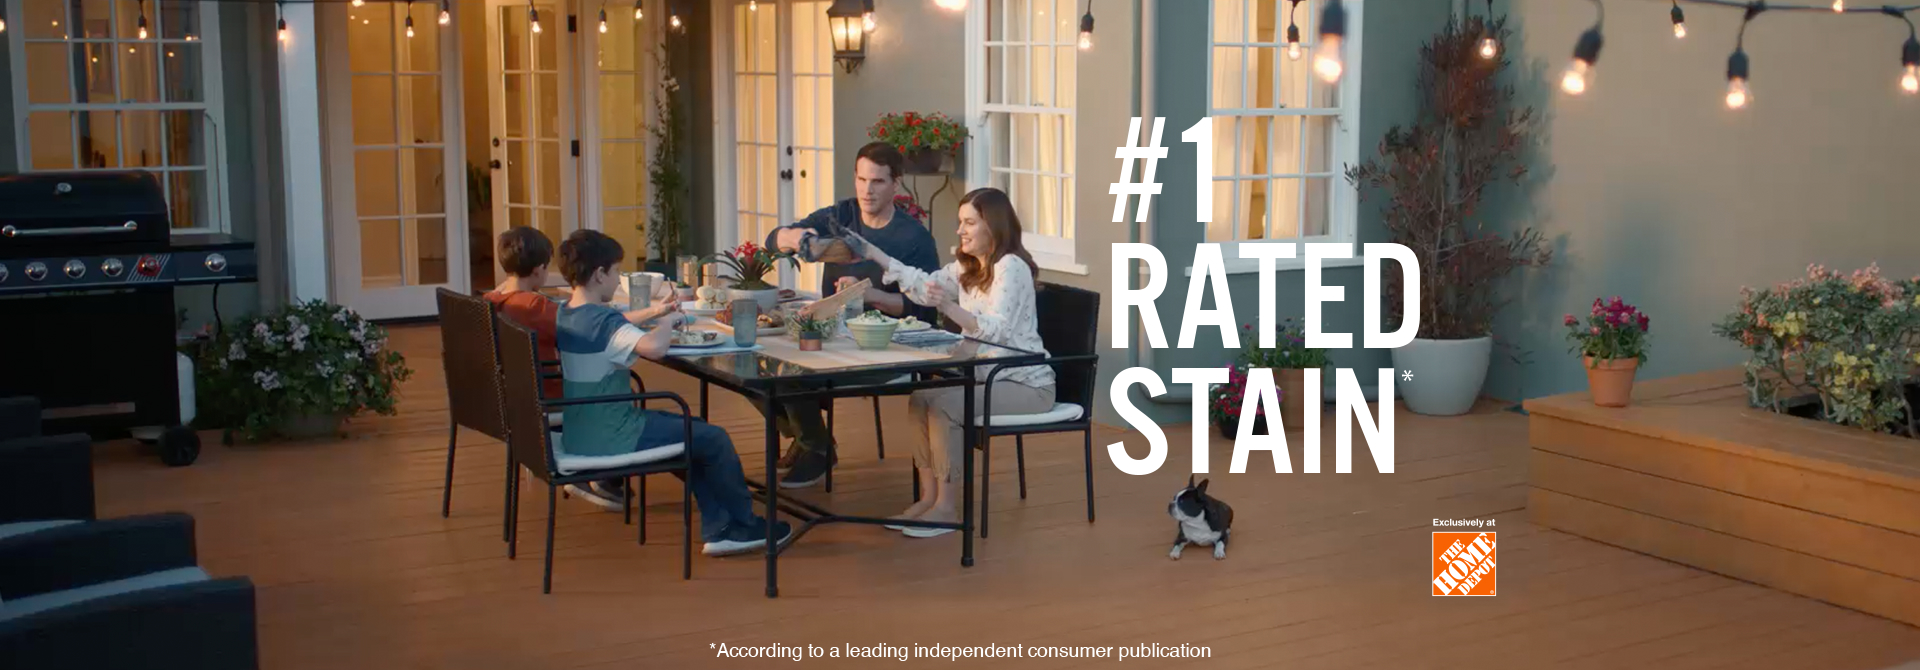 Family having a meal on their newly stain deck and the words #1 Rated Stain in foreground.